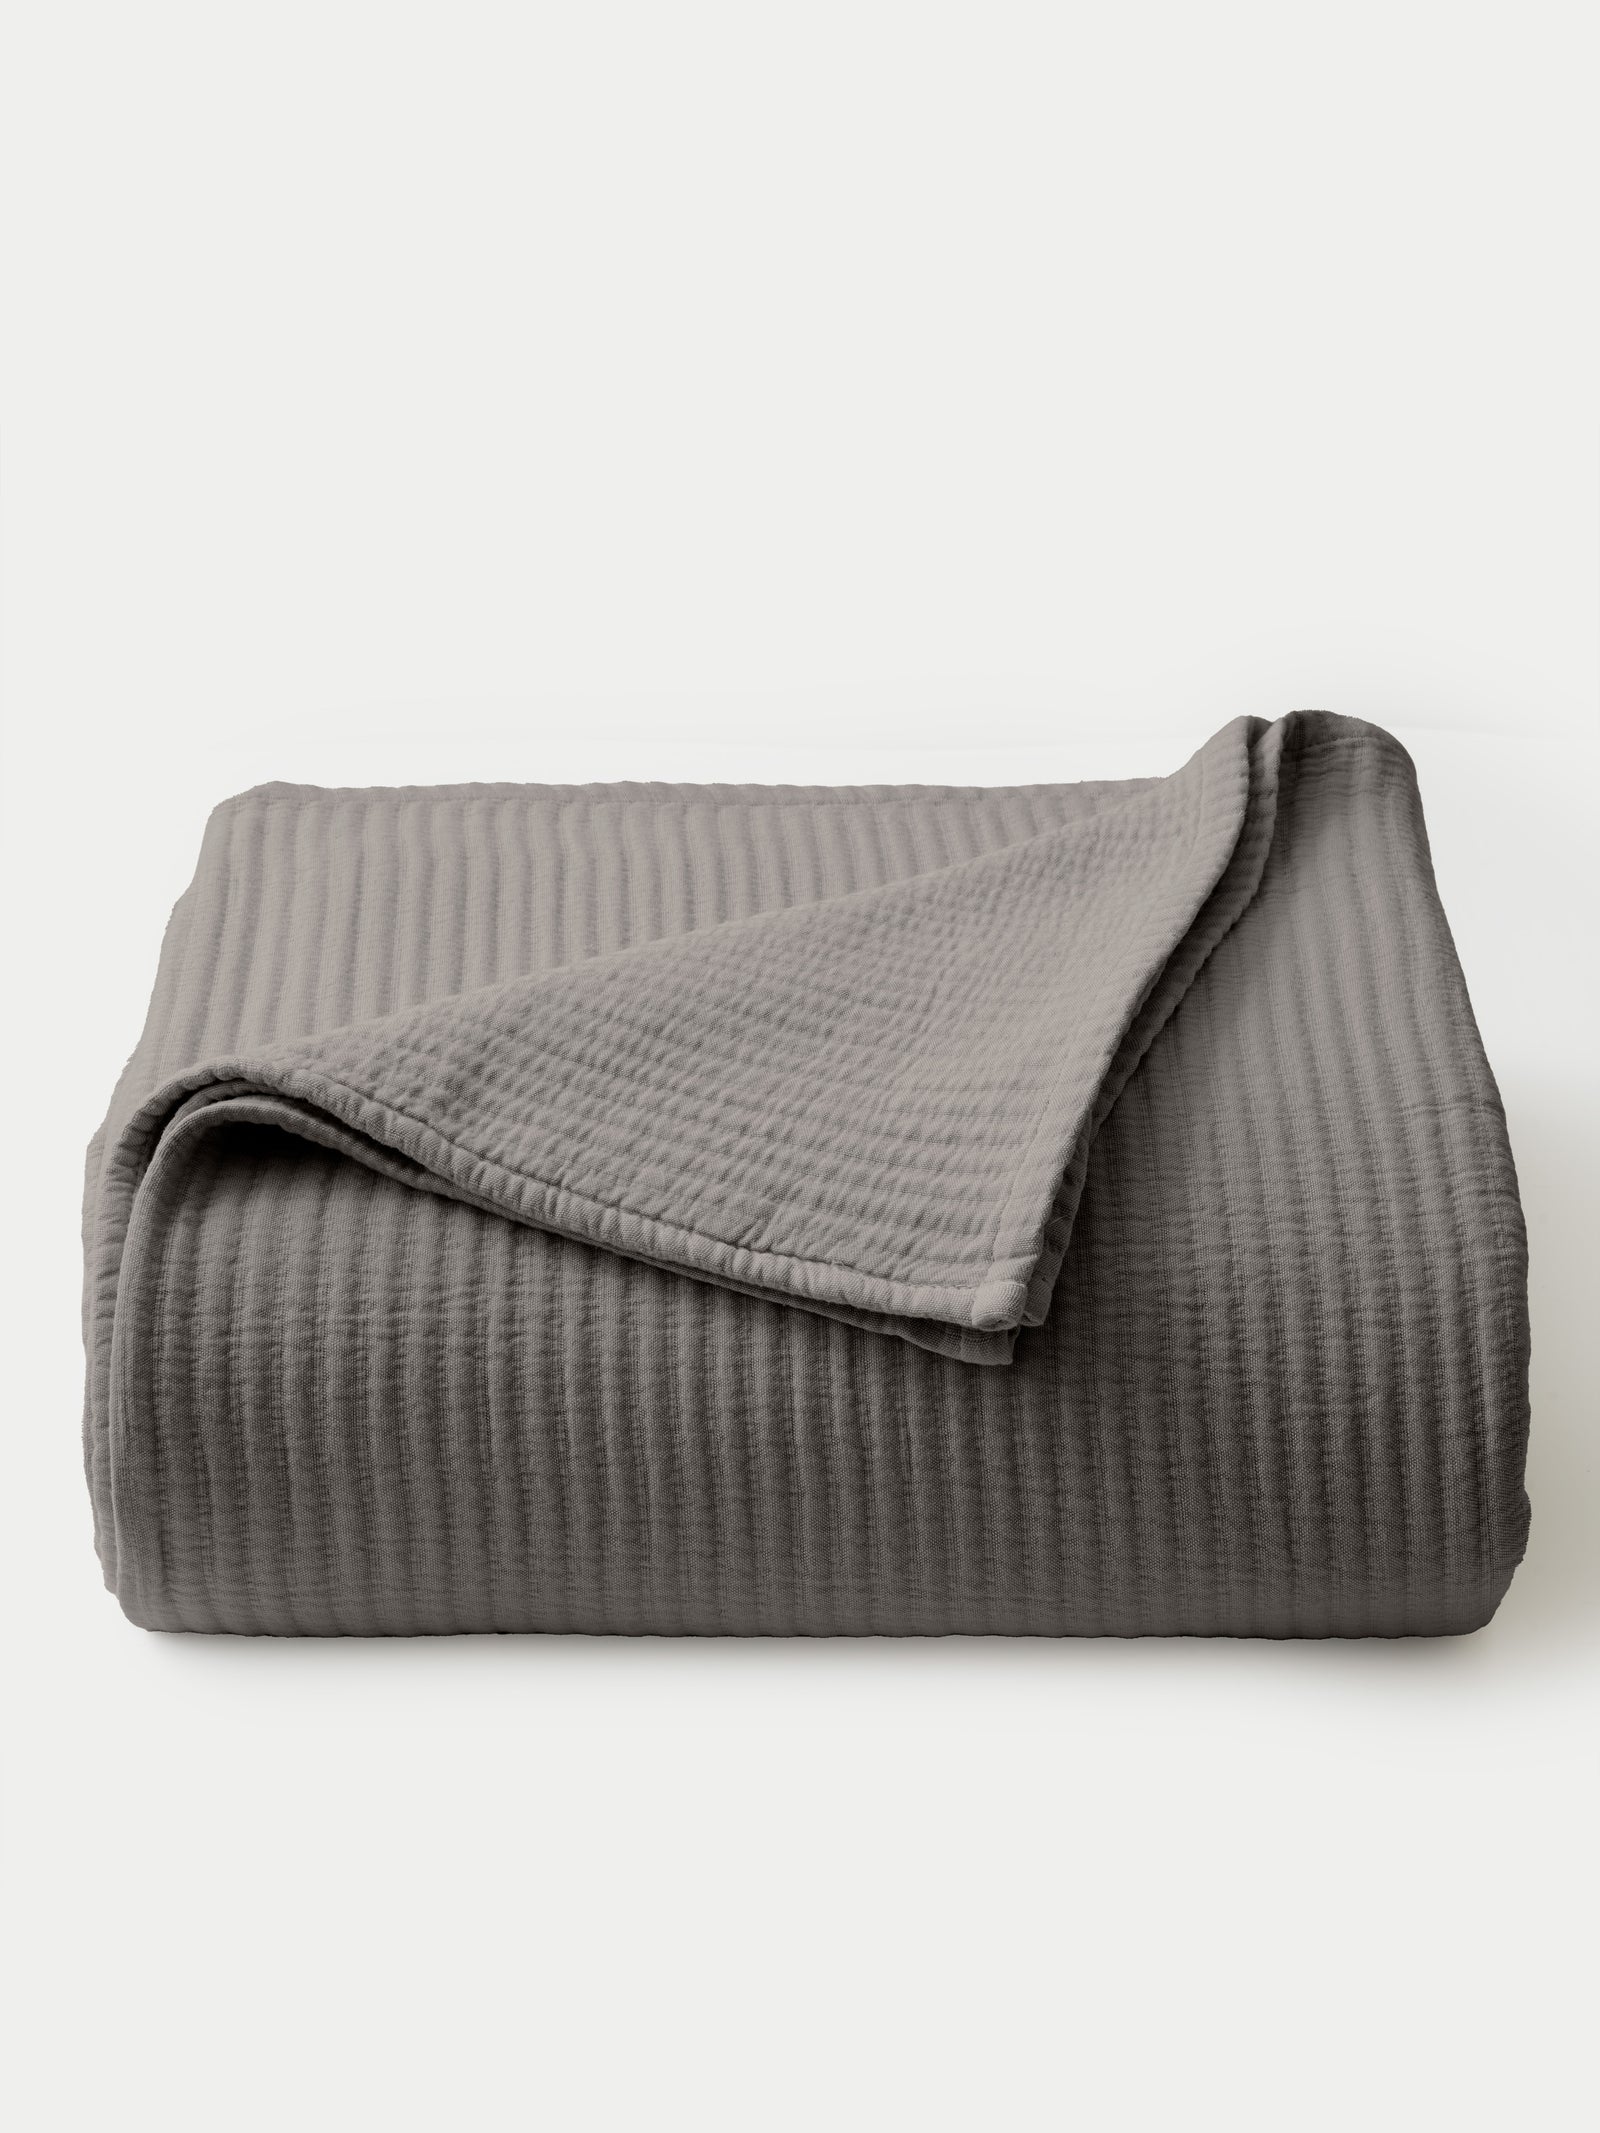 Charcoal coverlet folded with a white background 